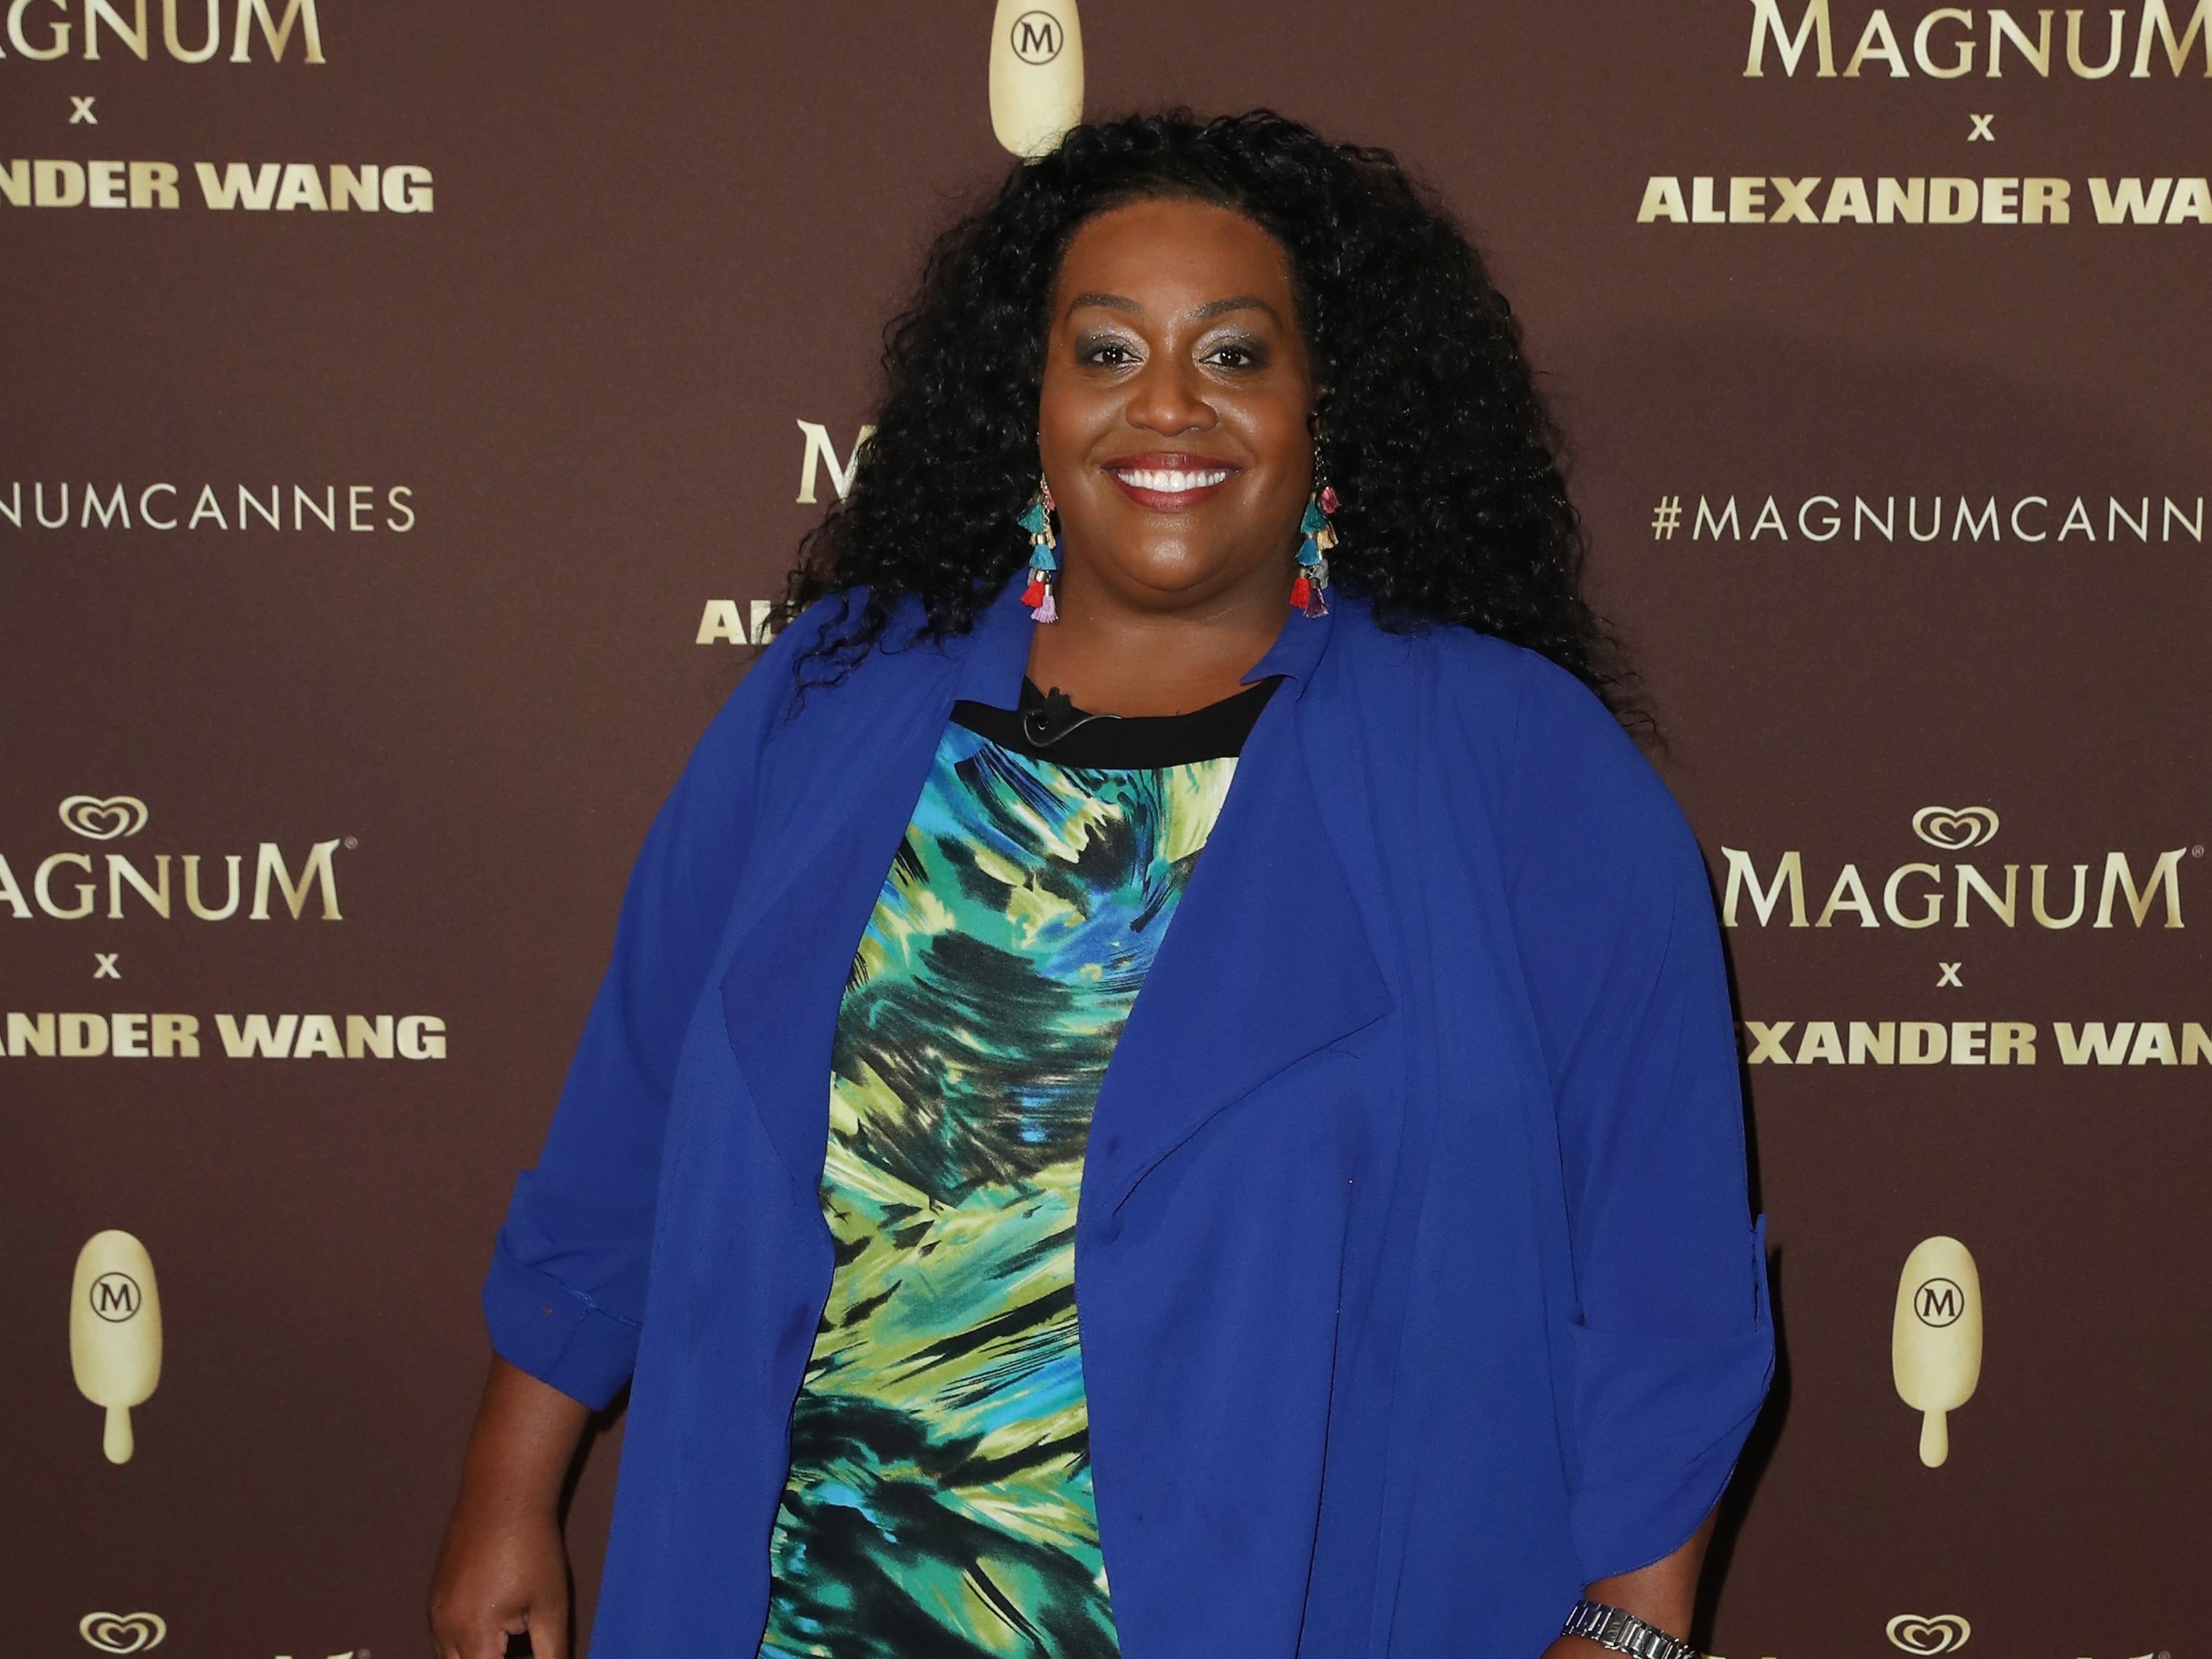 Alison Hammond attends the Magnum VIP Party during the 71st annual Cannes Film Festival